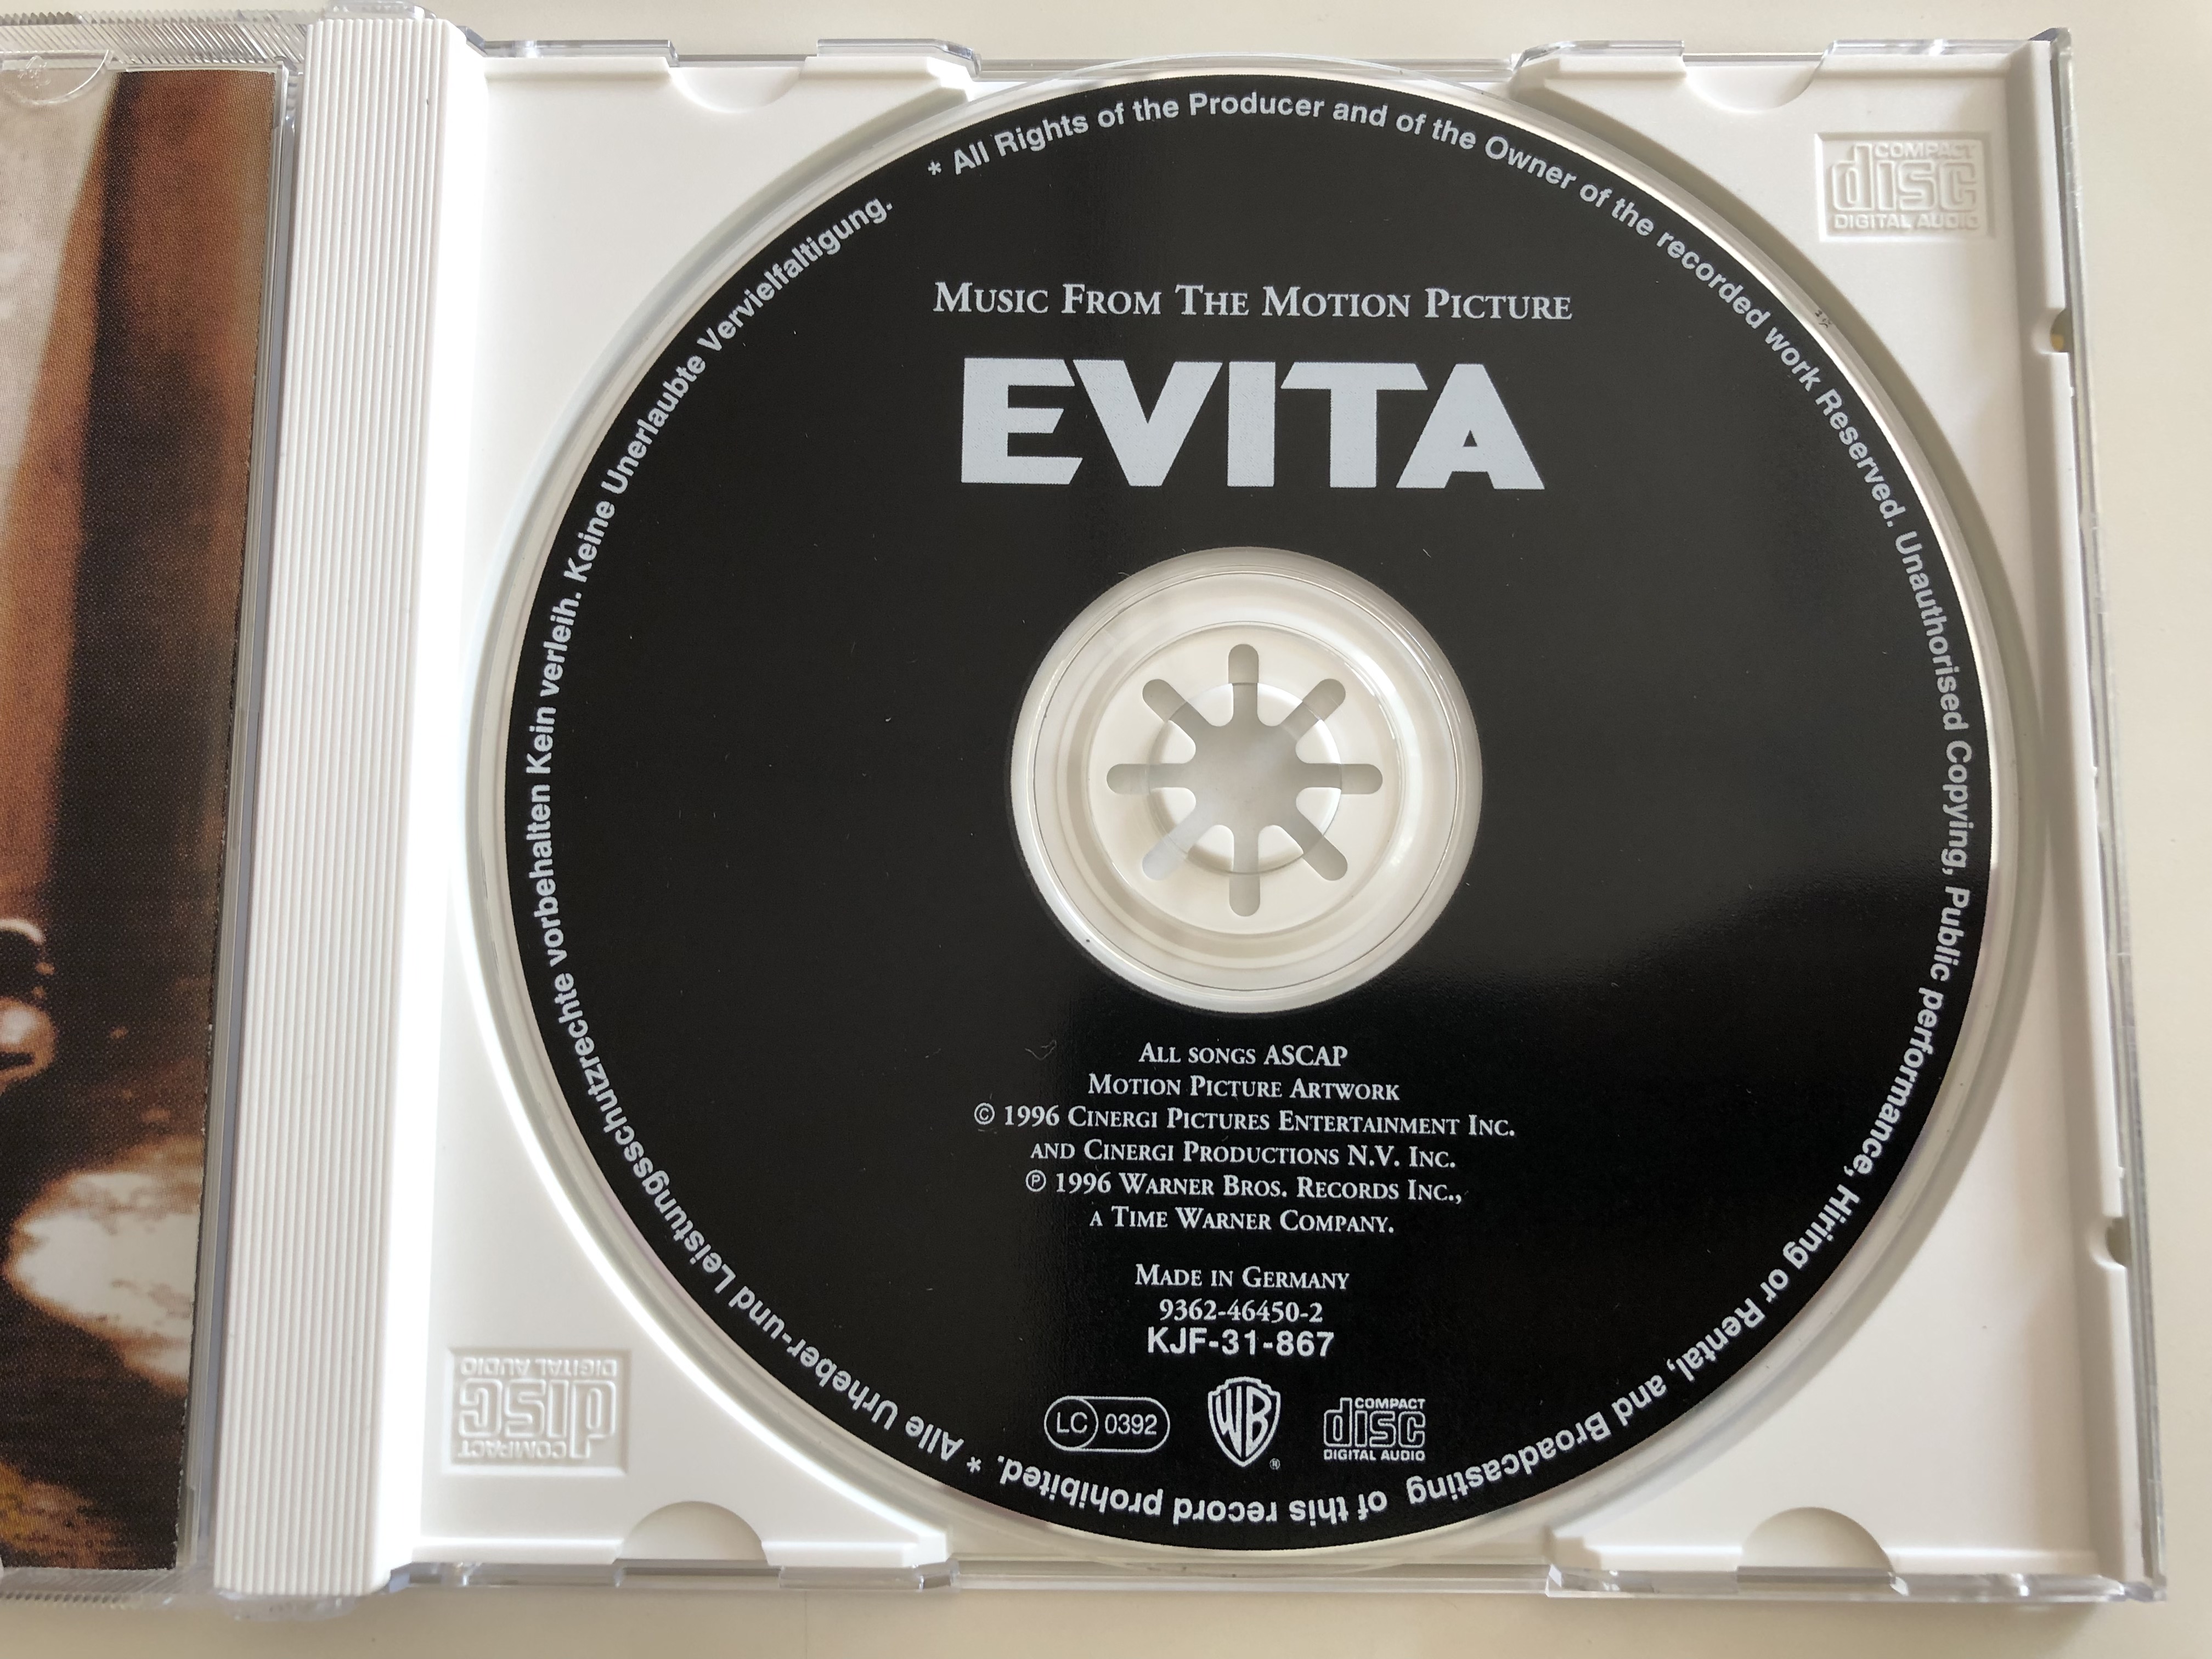 evita-music-from-the-motion-picture-audio-cd-1996-warner-music-we-893-3-.jpg